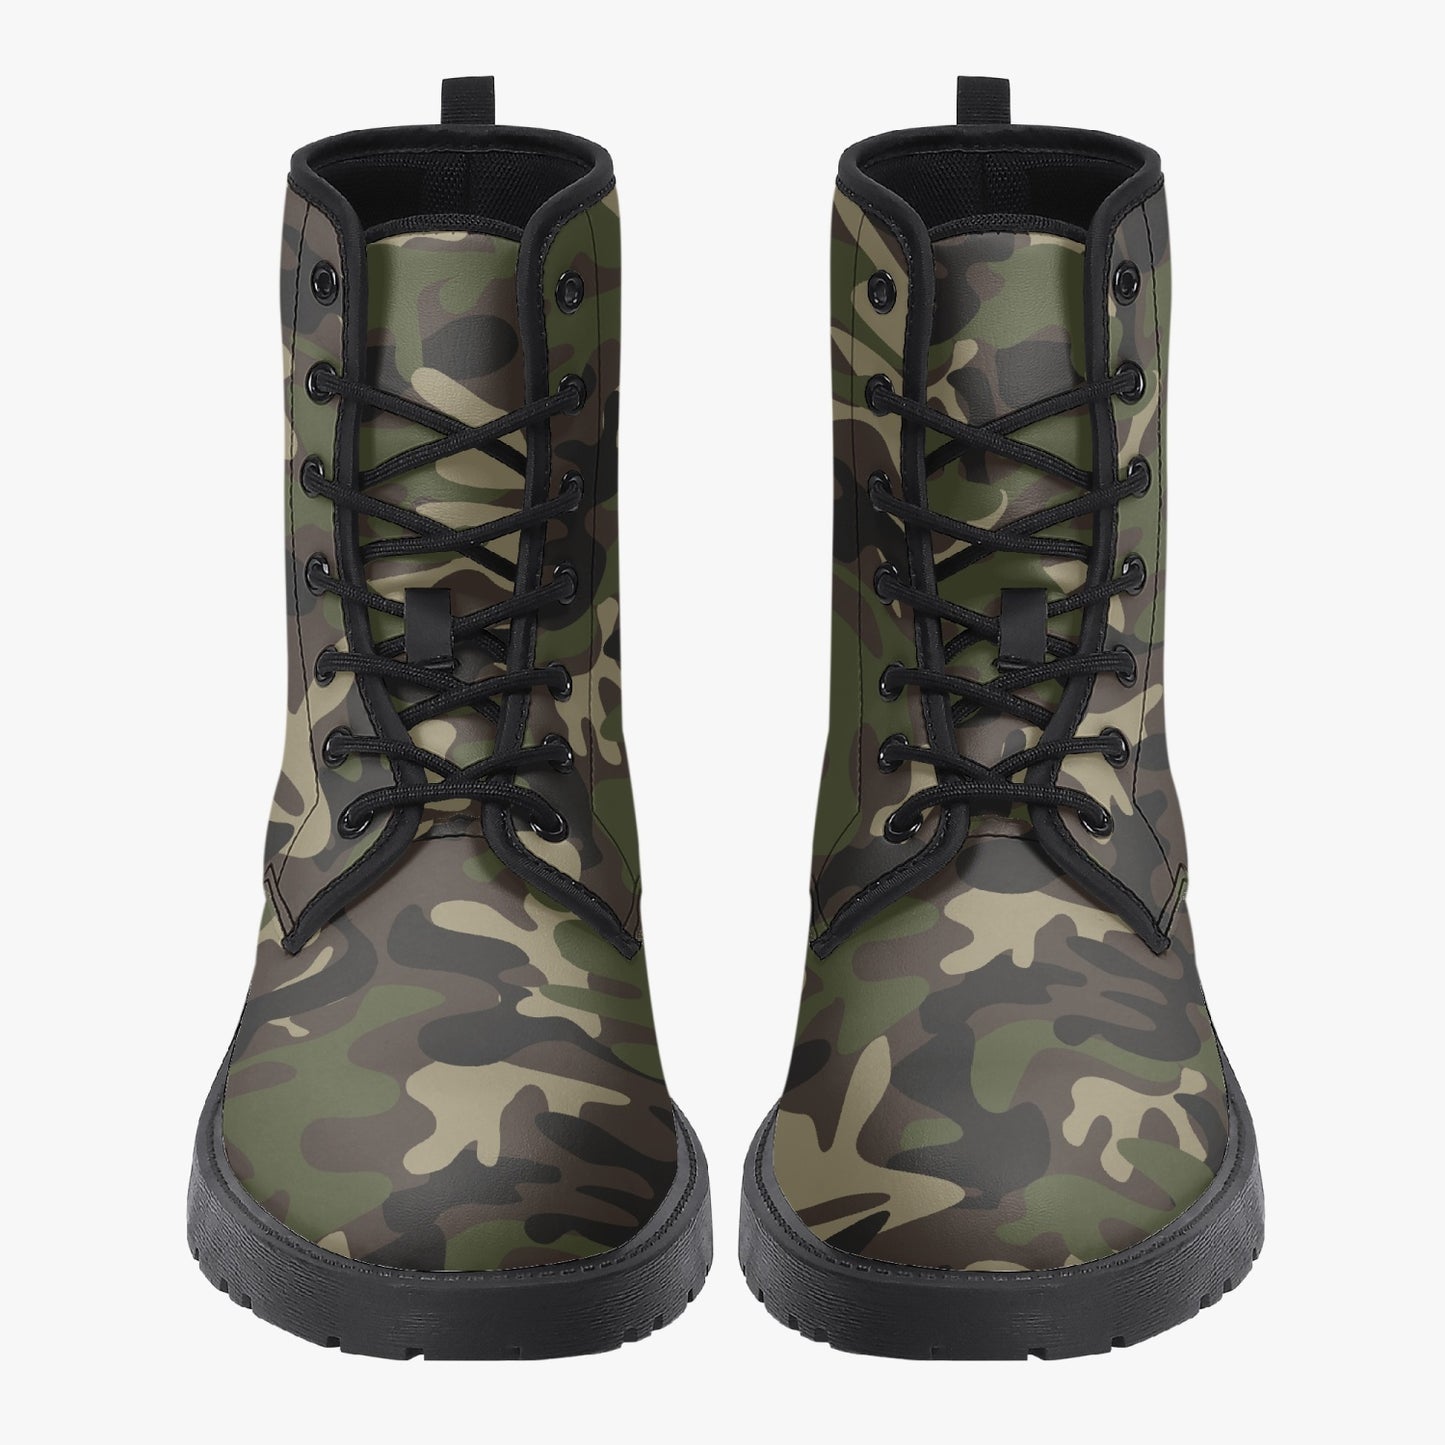 Camouflage Women Vegan Leather Combat Boots, Green Army Camo Lace Up Shoes Hiking Festival Black Ankle Work Winter Casual Custom Starcove Fashion